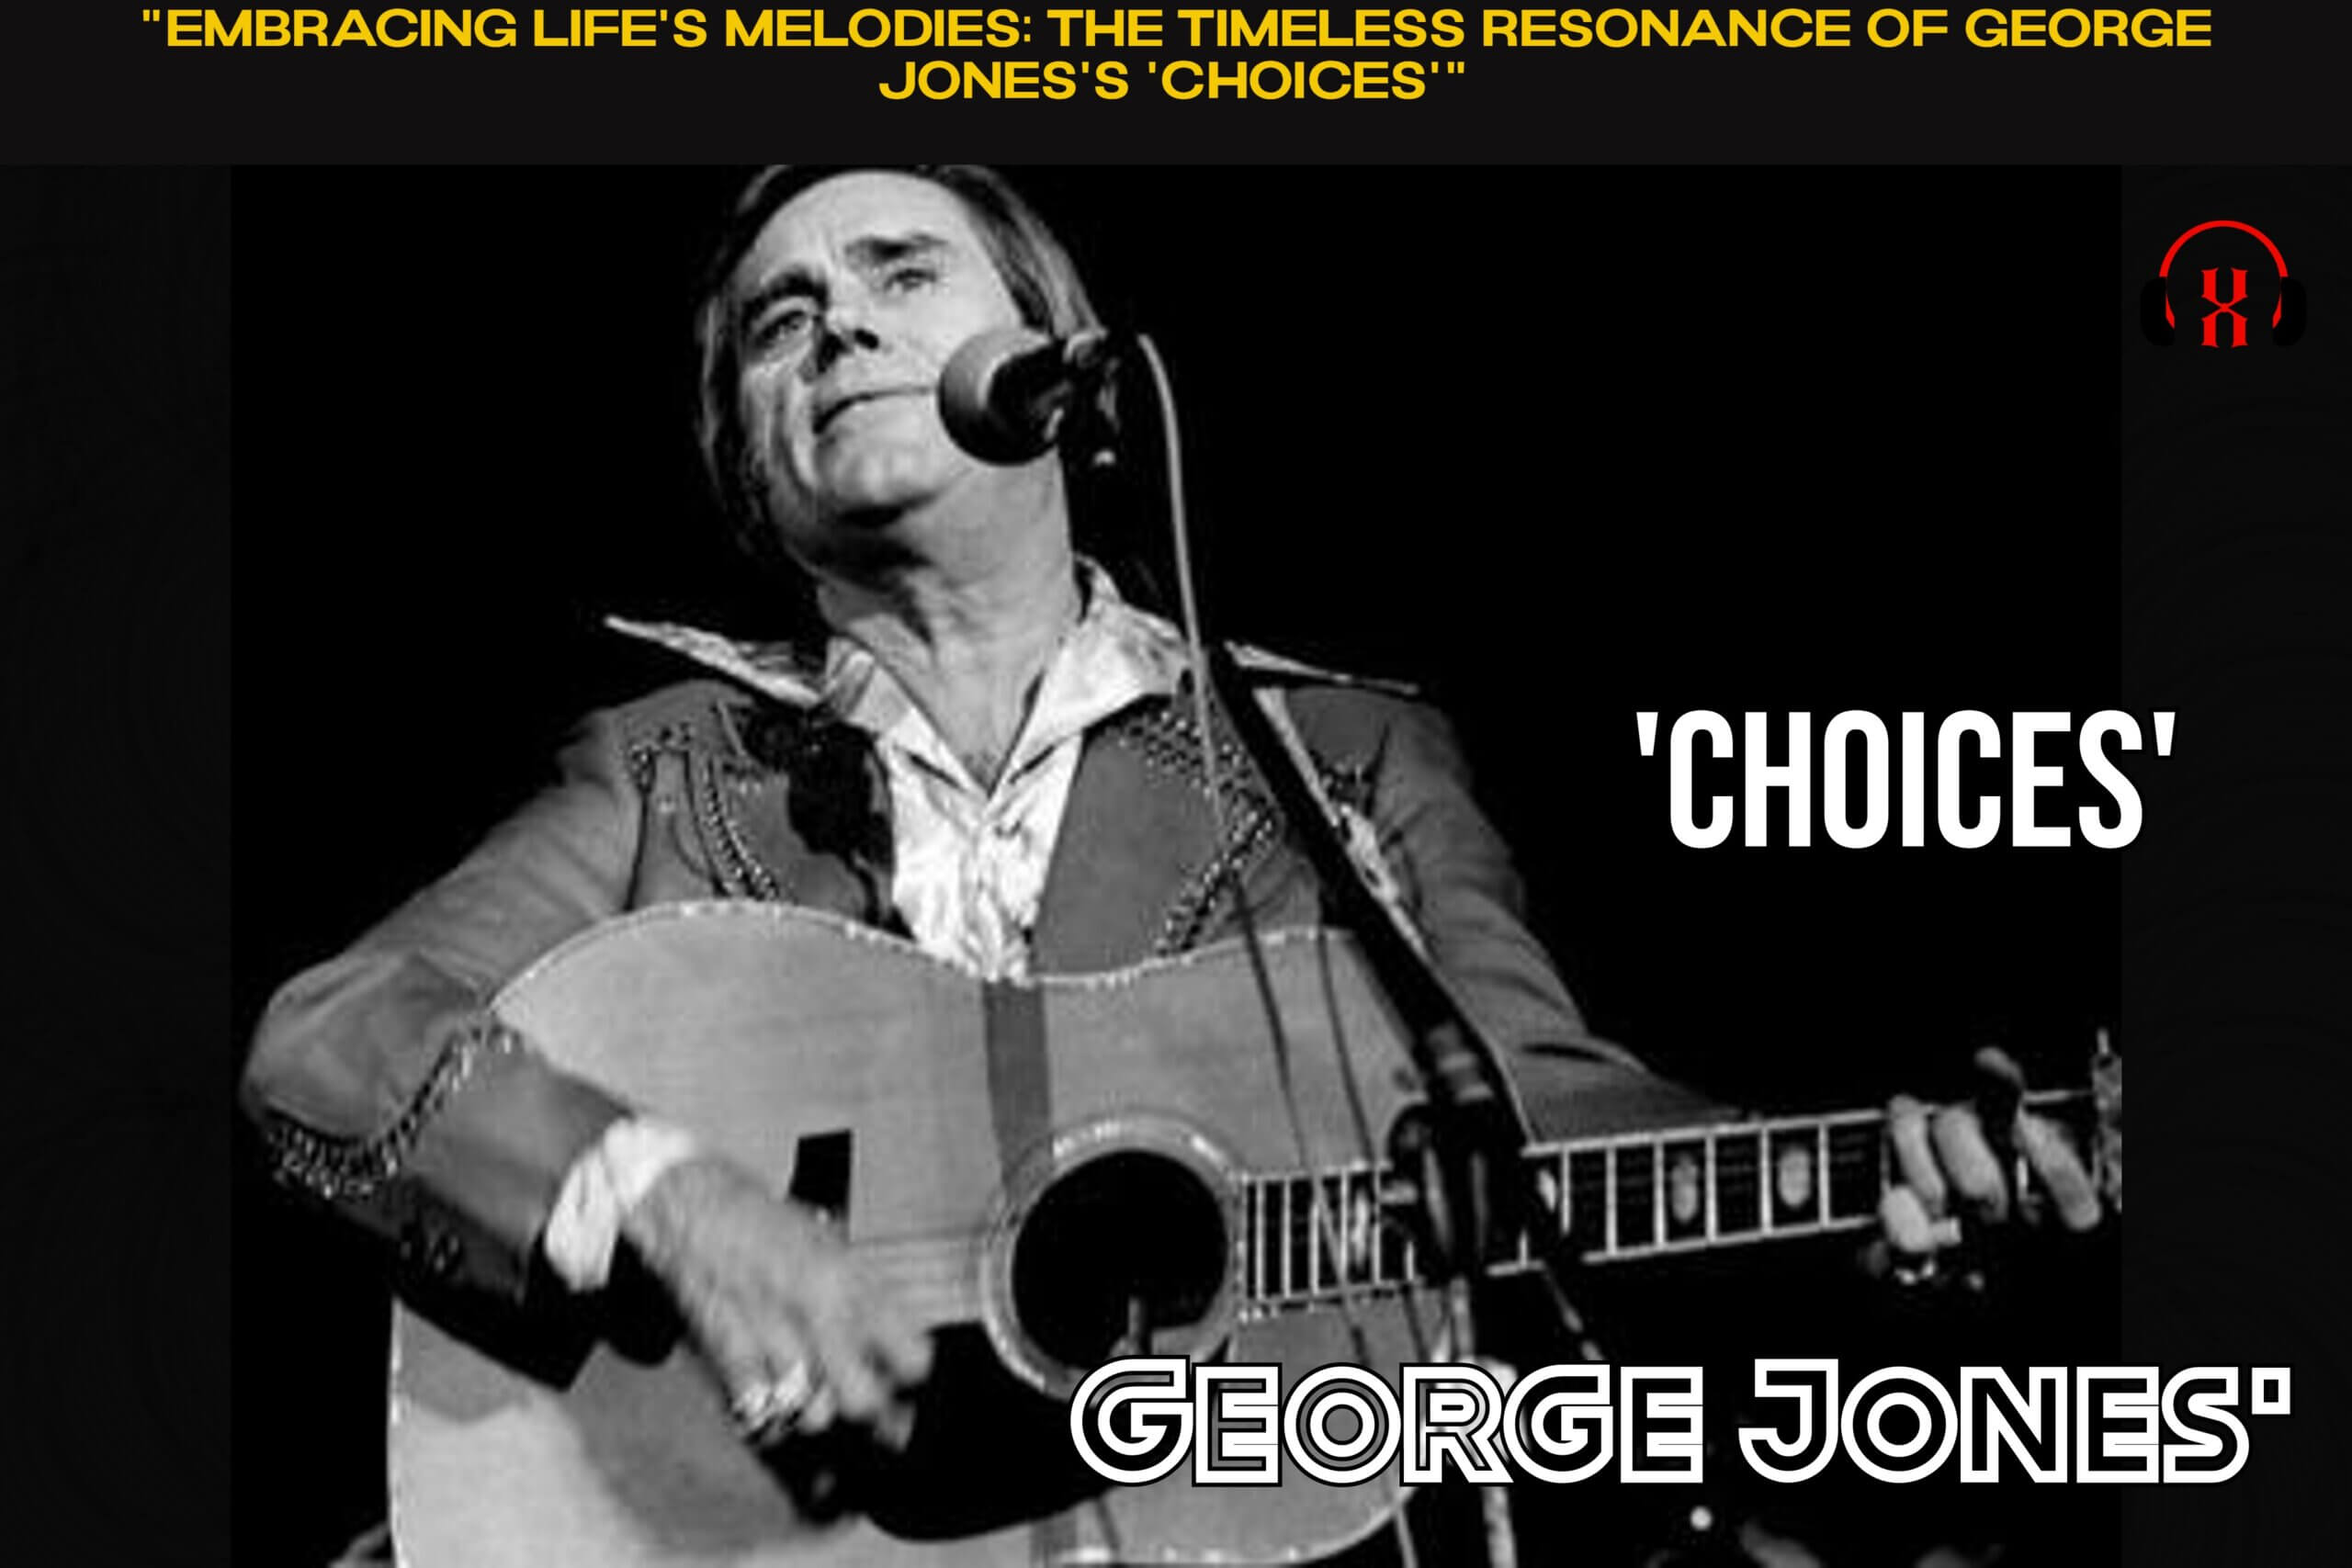 "Embracing Life's Melodies: The Timeless Resonance of George Jones's 'Choices'"